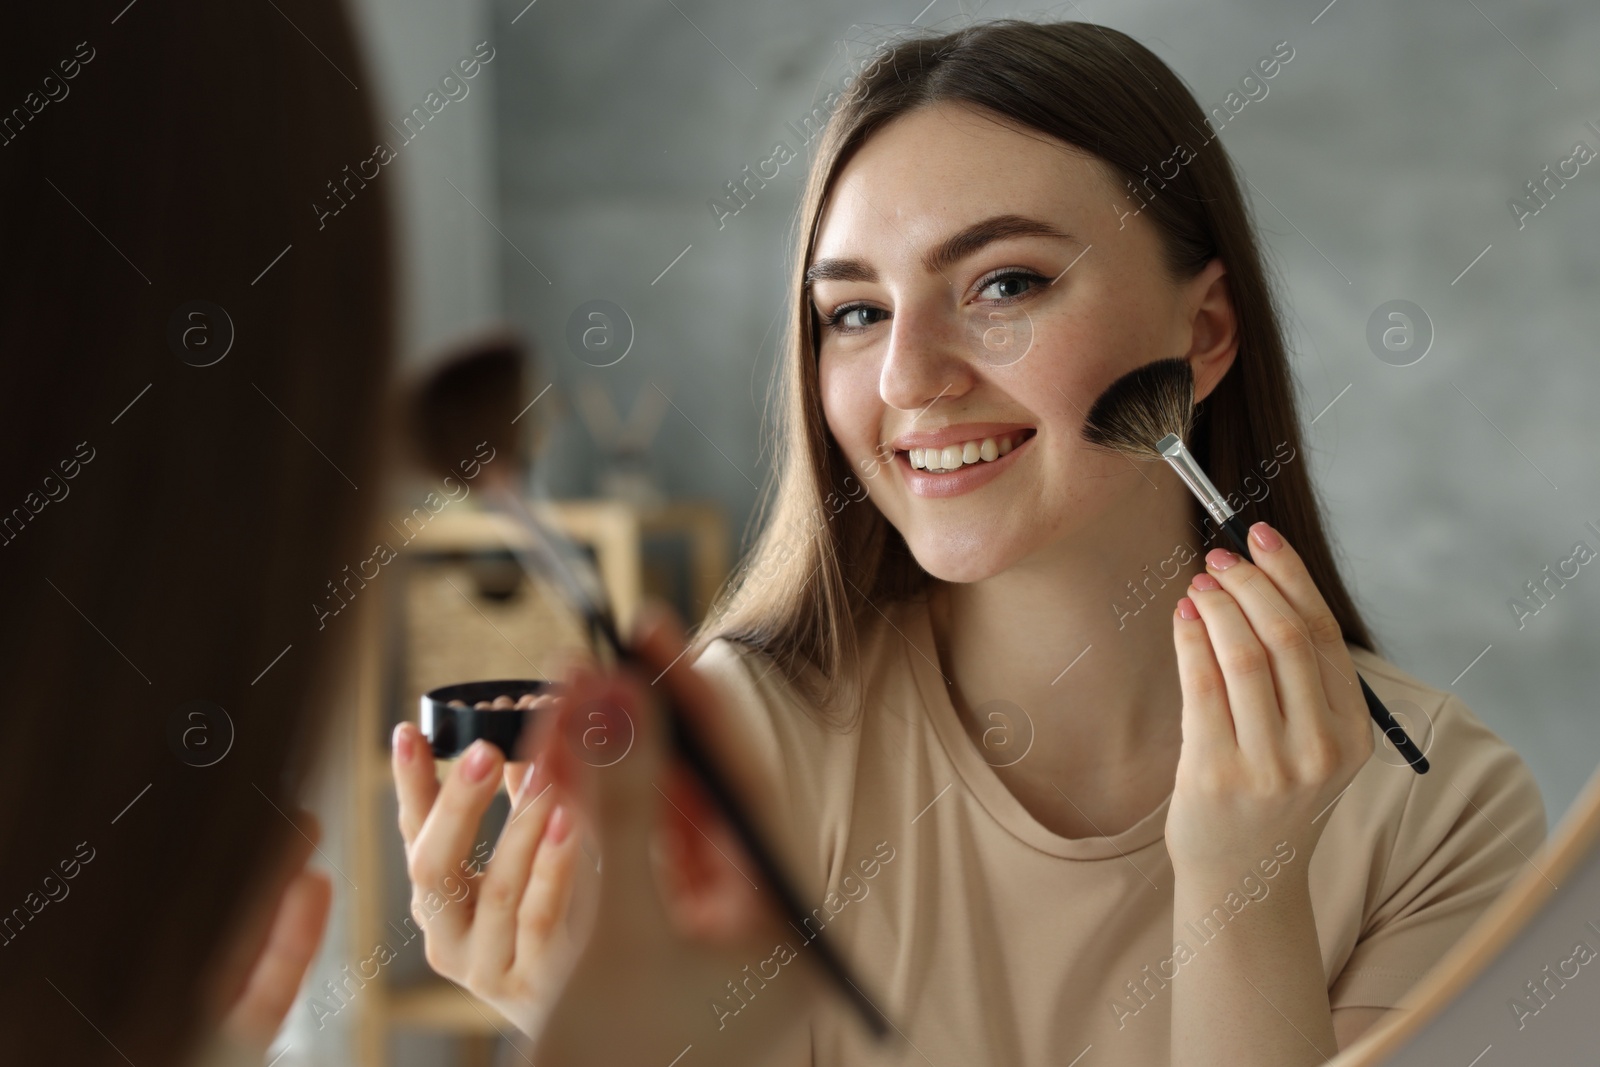 Photo of Smiling woman with freckles applying makeup near mirror indoors